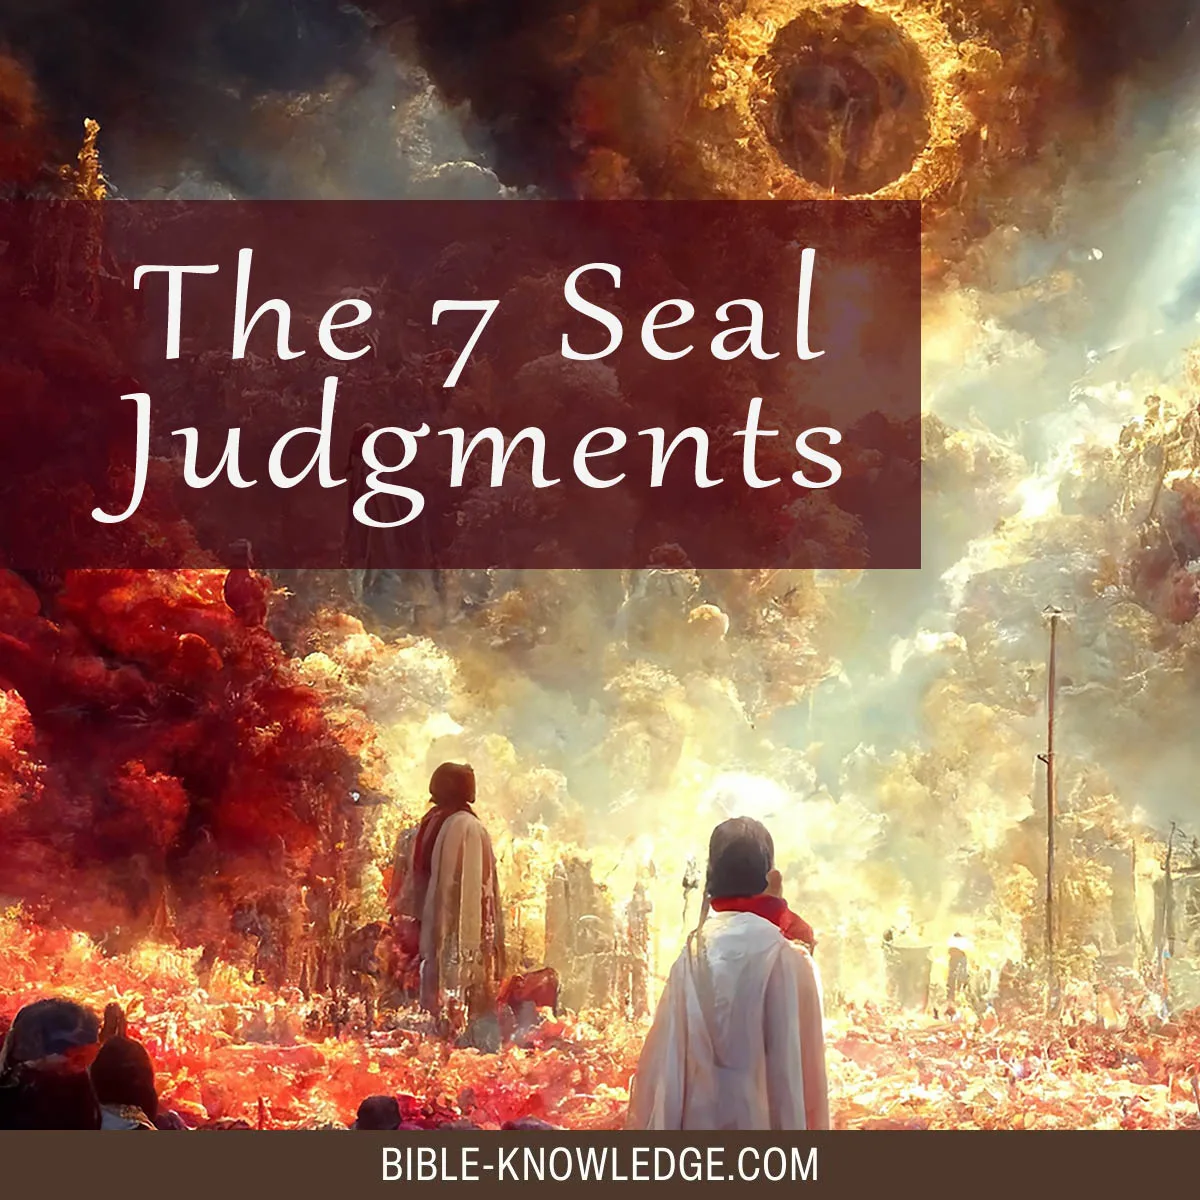 The 7 Seal Judgments